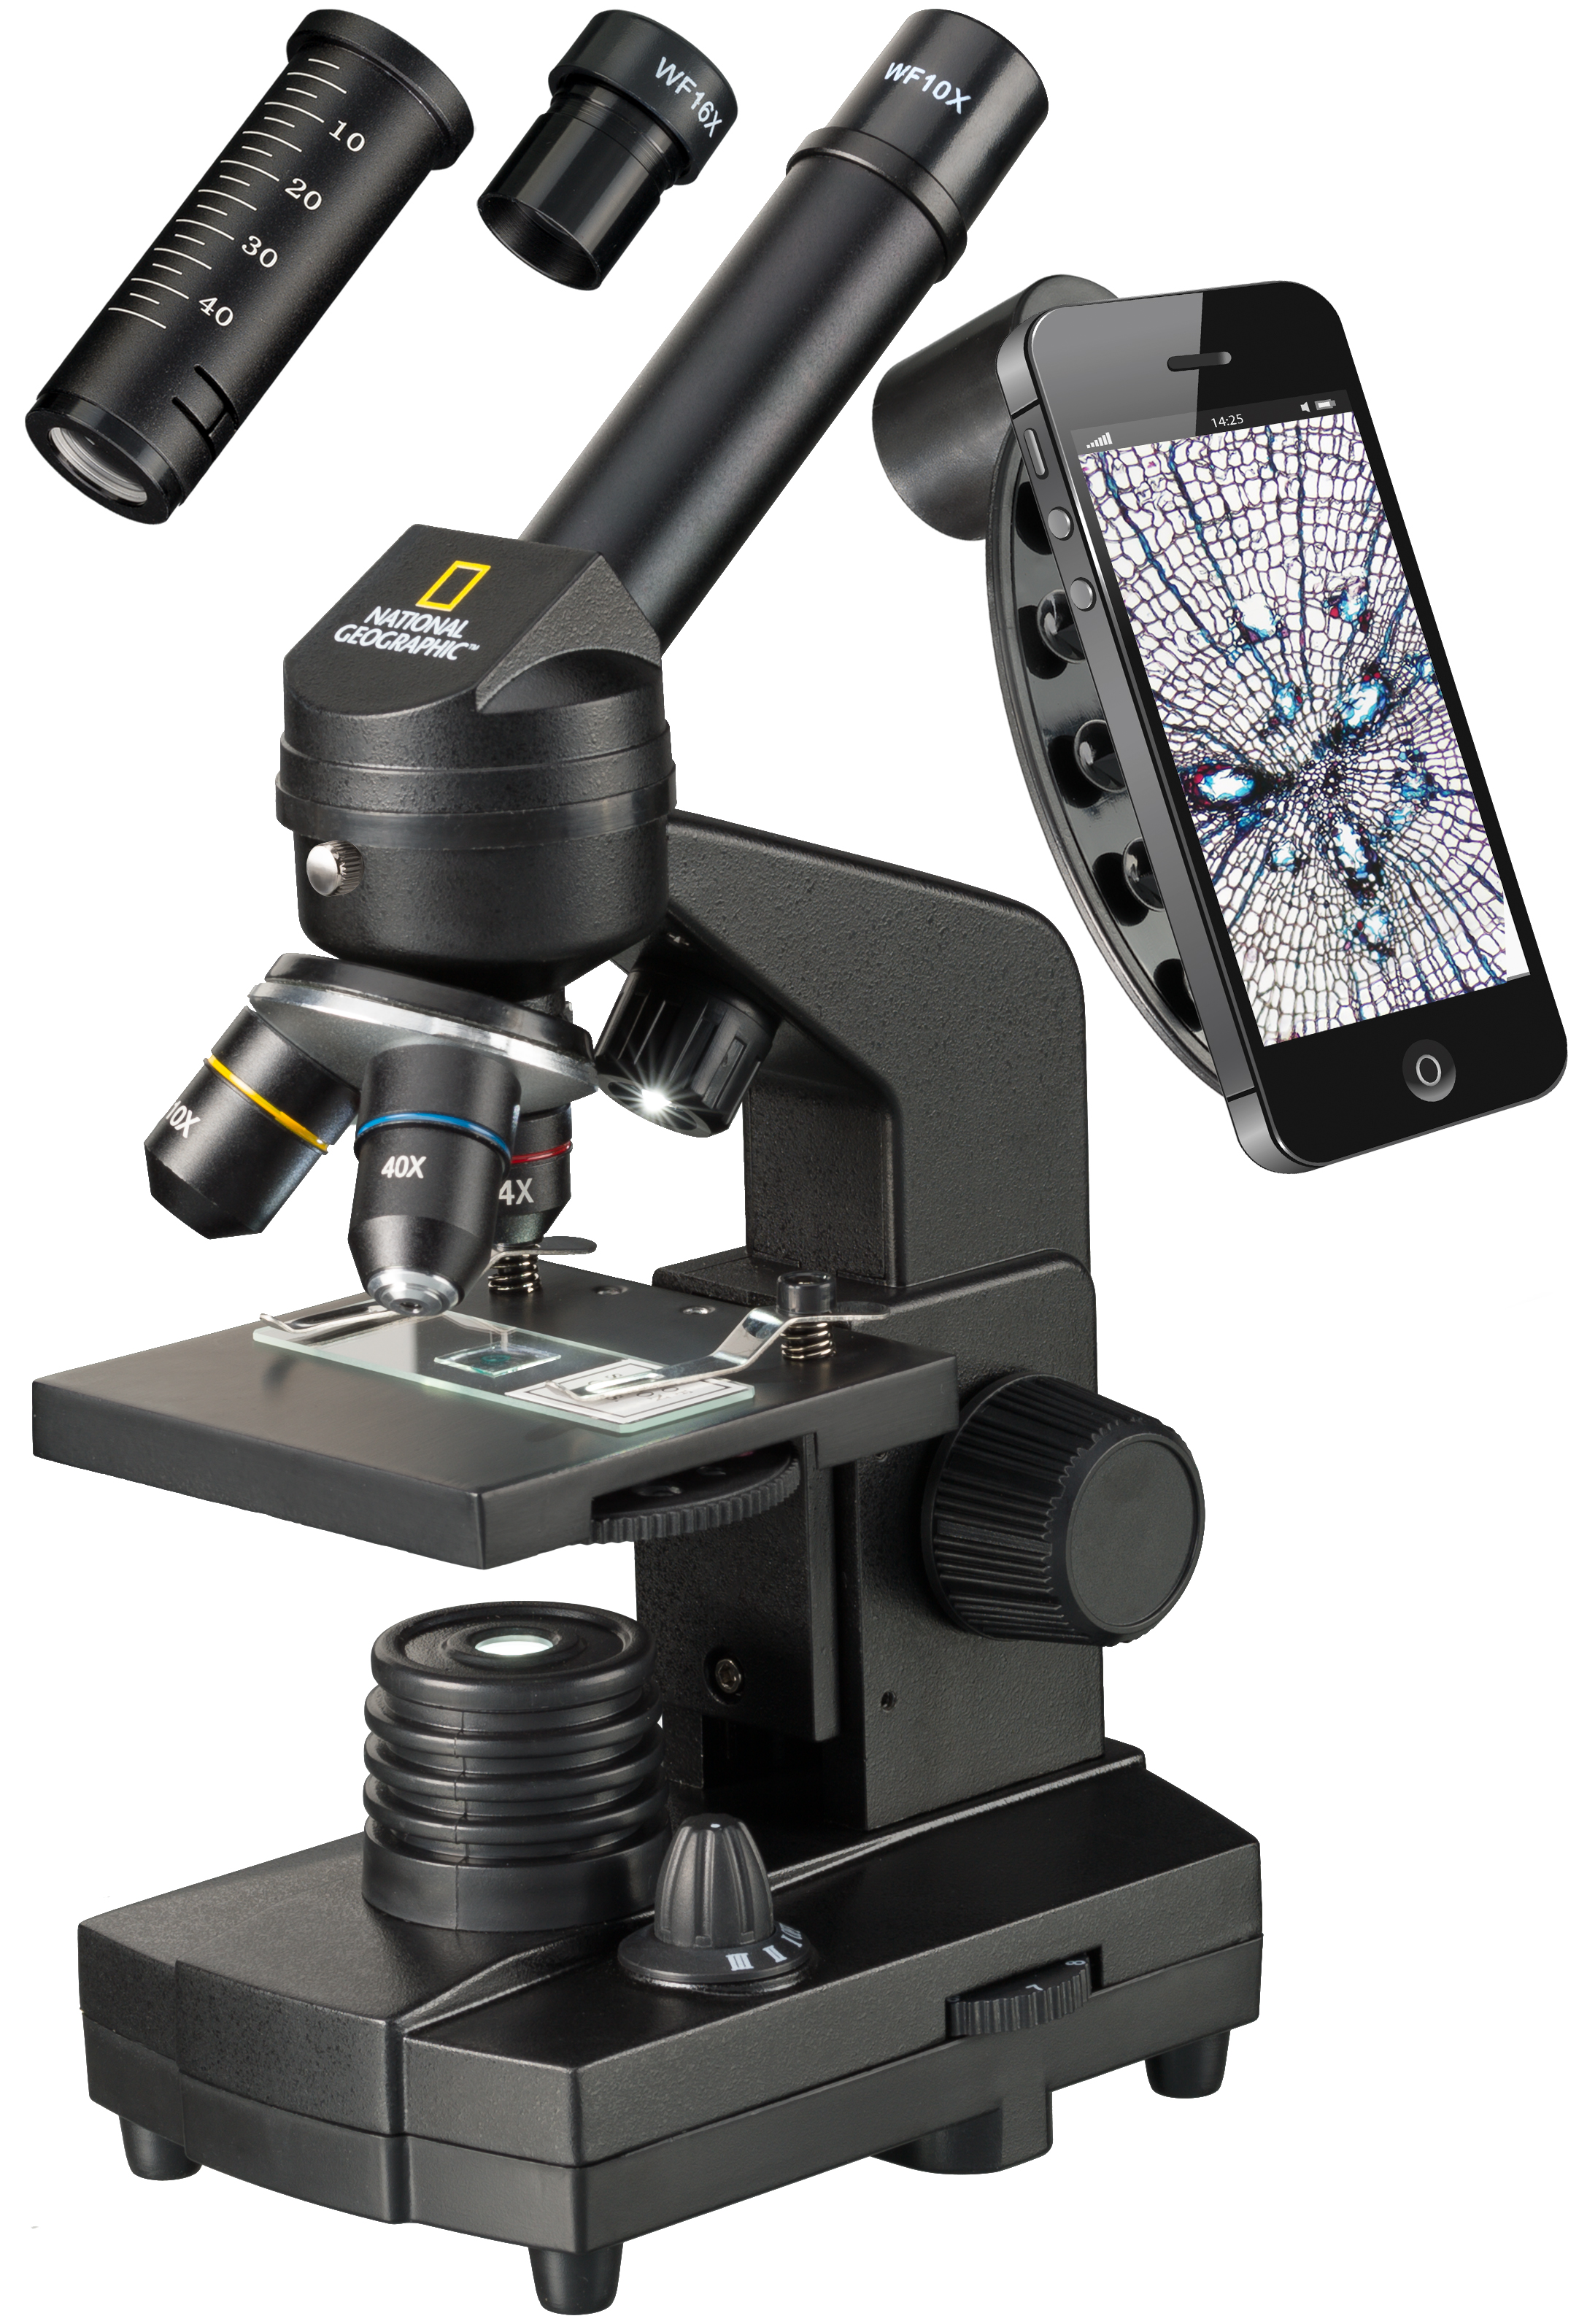 Partial seafood Mastermind Bresser | NATIONAL GEOGRAPHIC 40x-1280x Microscope with Smartphone holder |  Expand Your Horizon